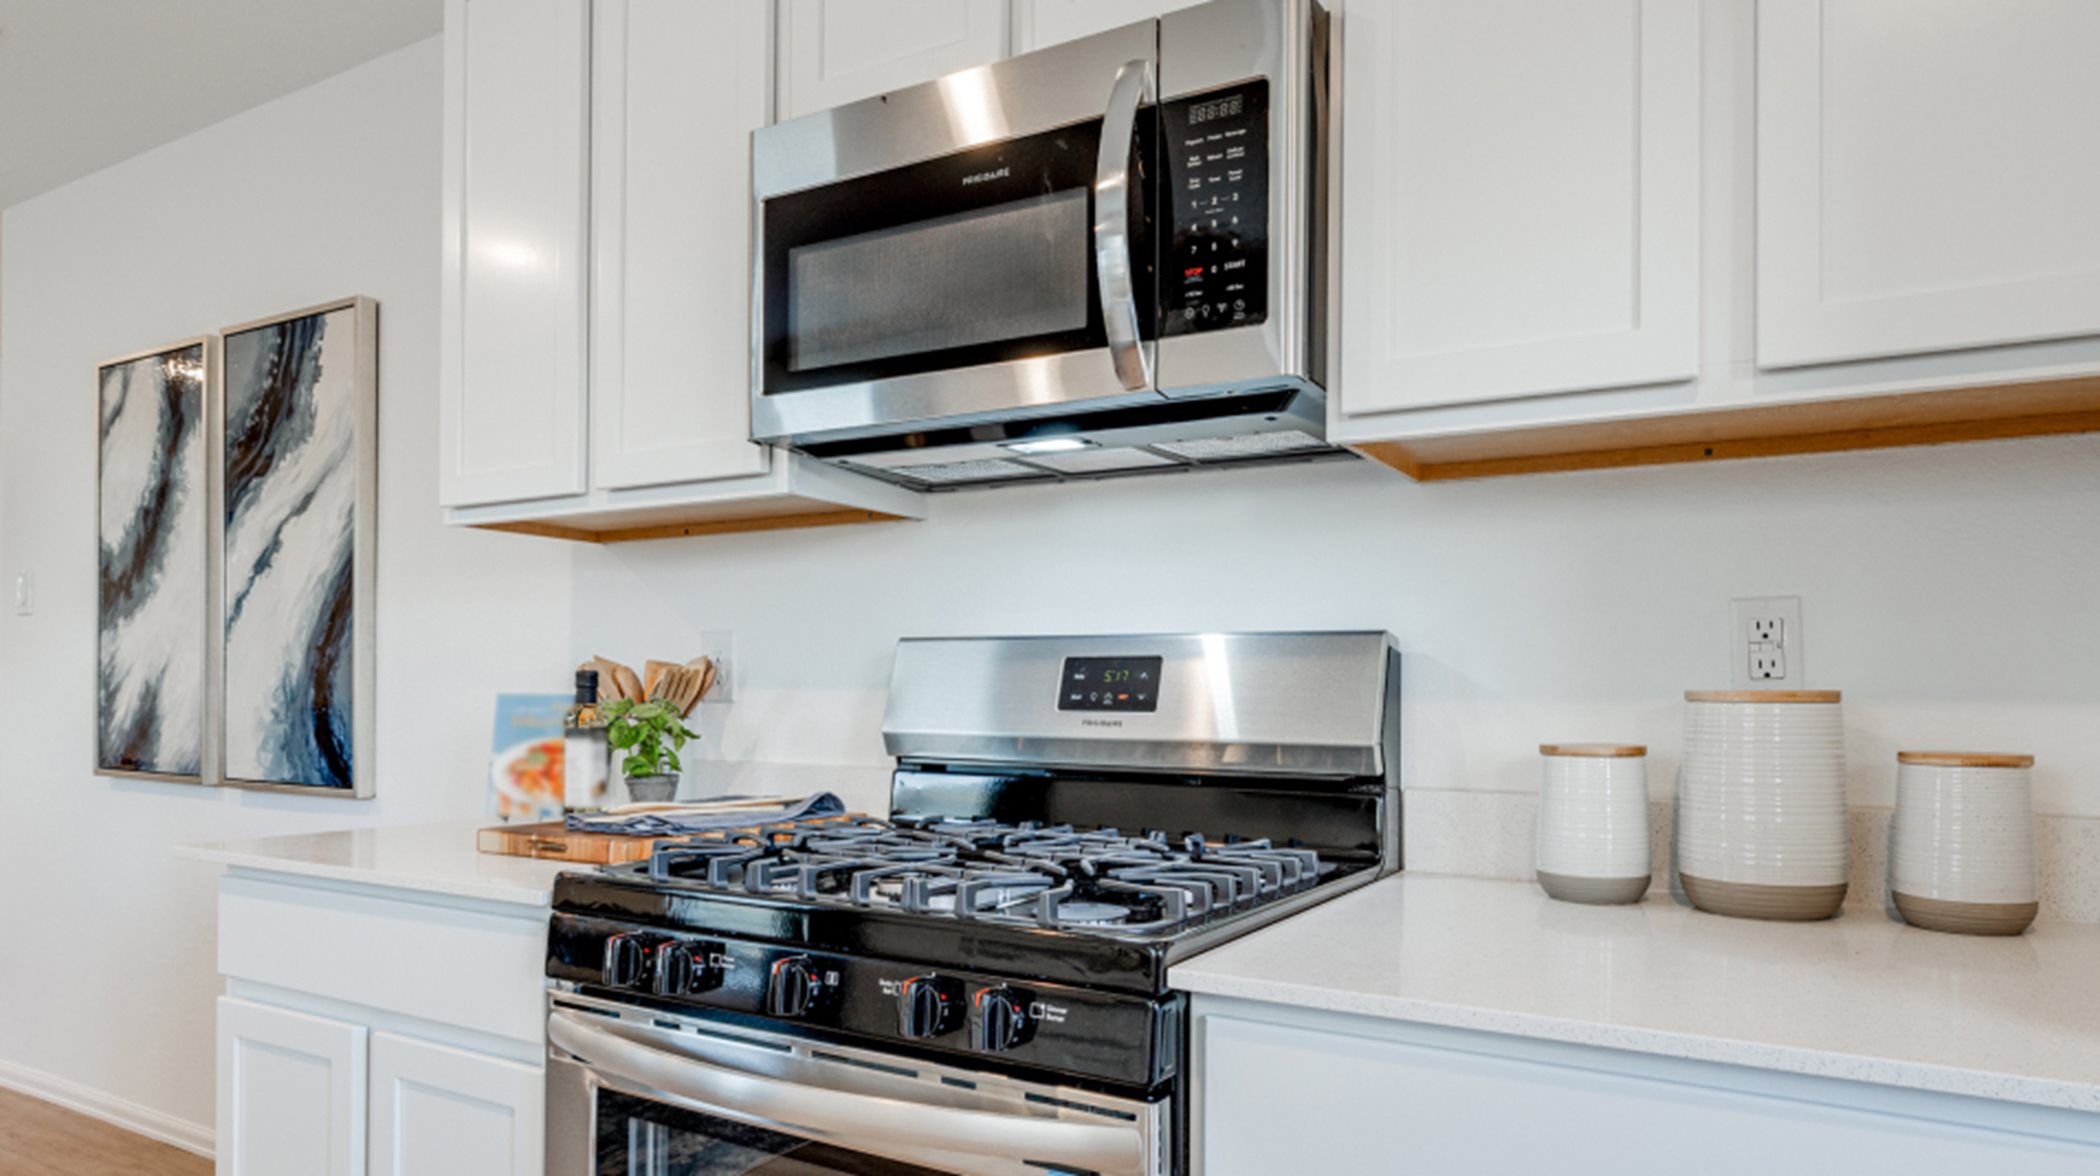 The kitchen boasts all-new stainless steel appliances